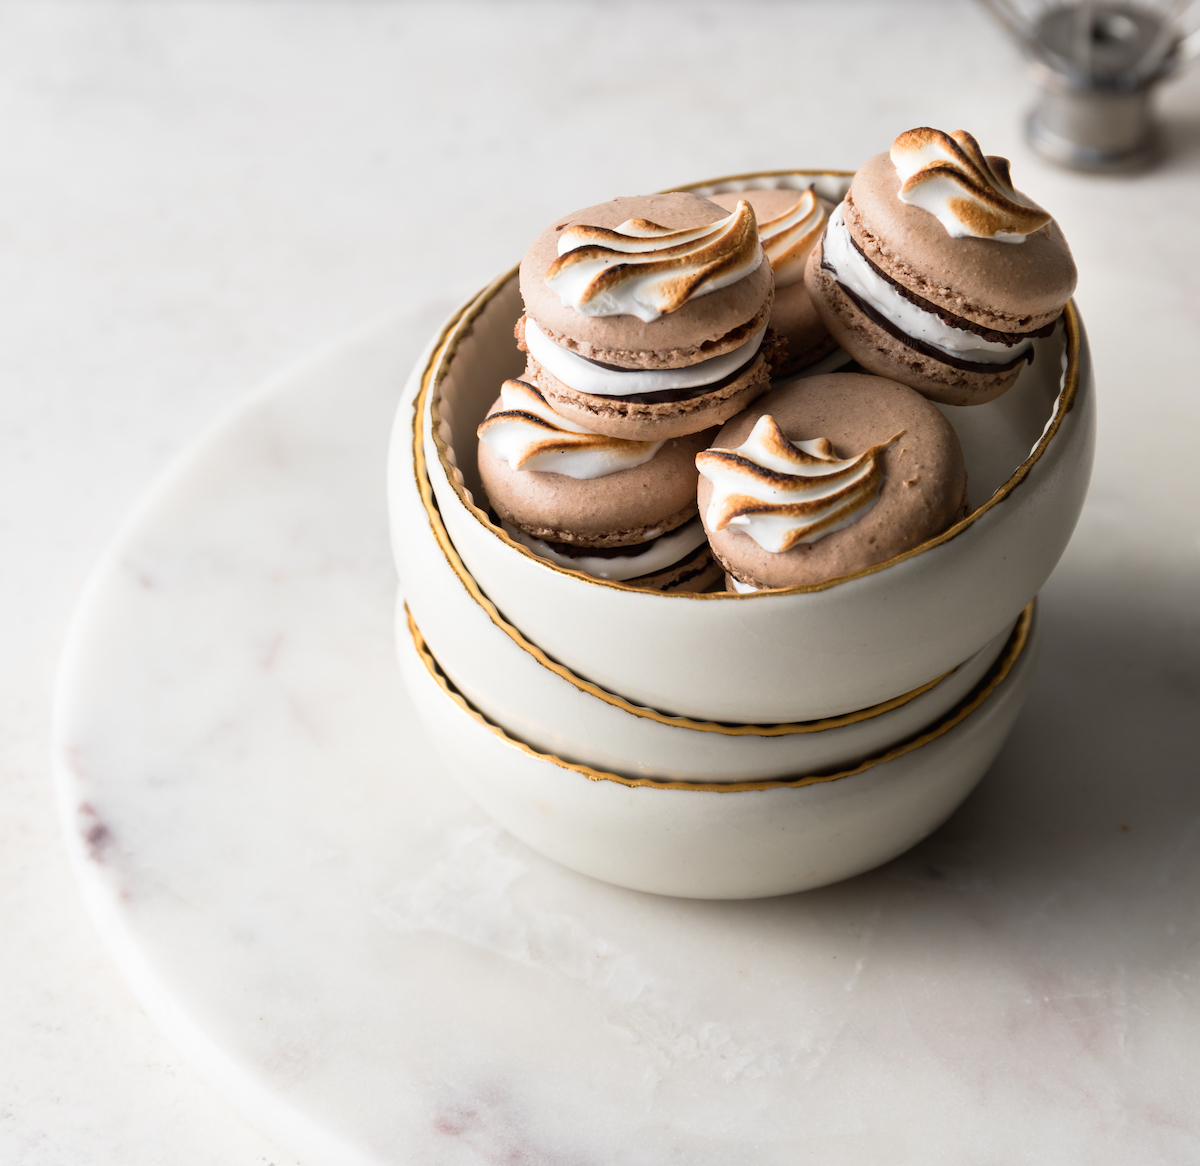 Chocolate French Macarons with marshmallow filling in a bowl